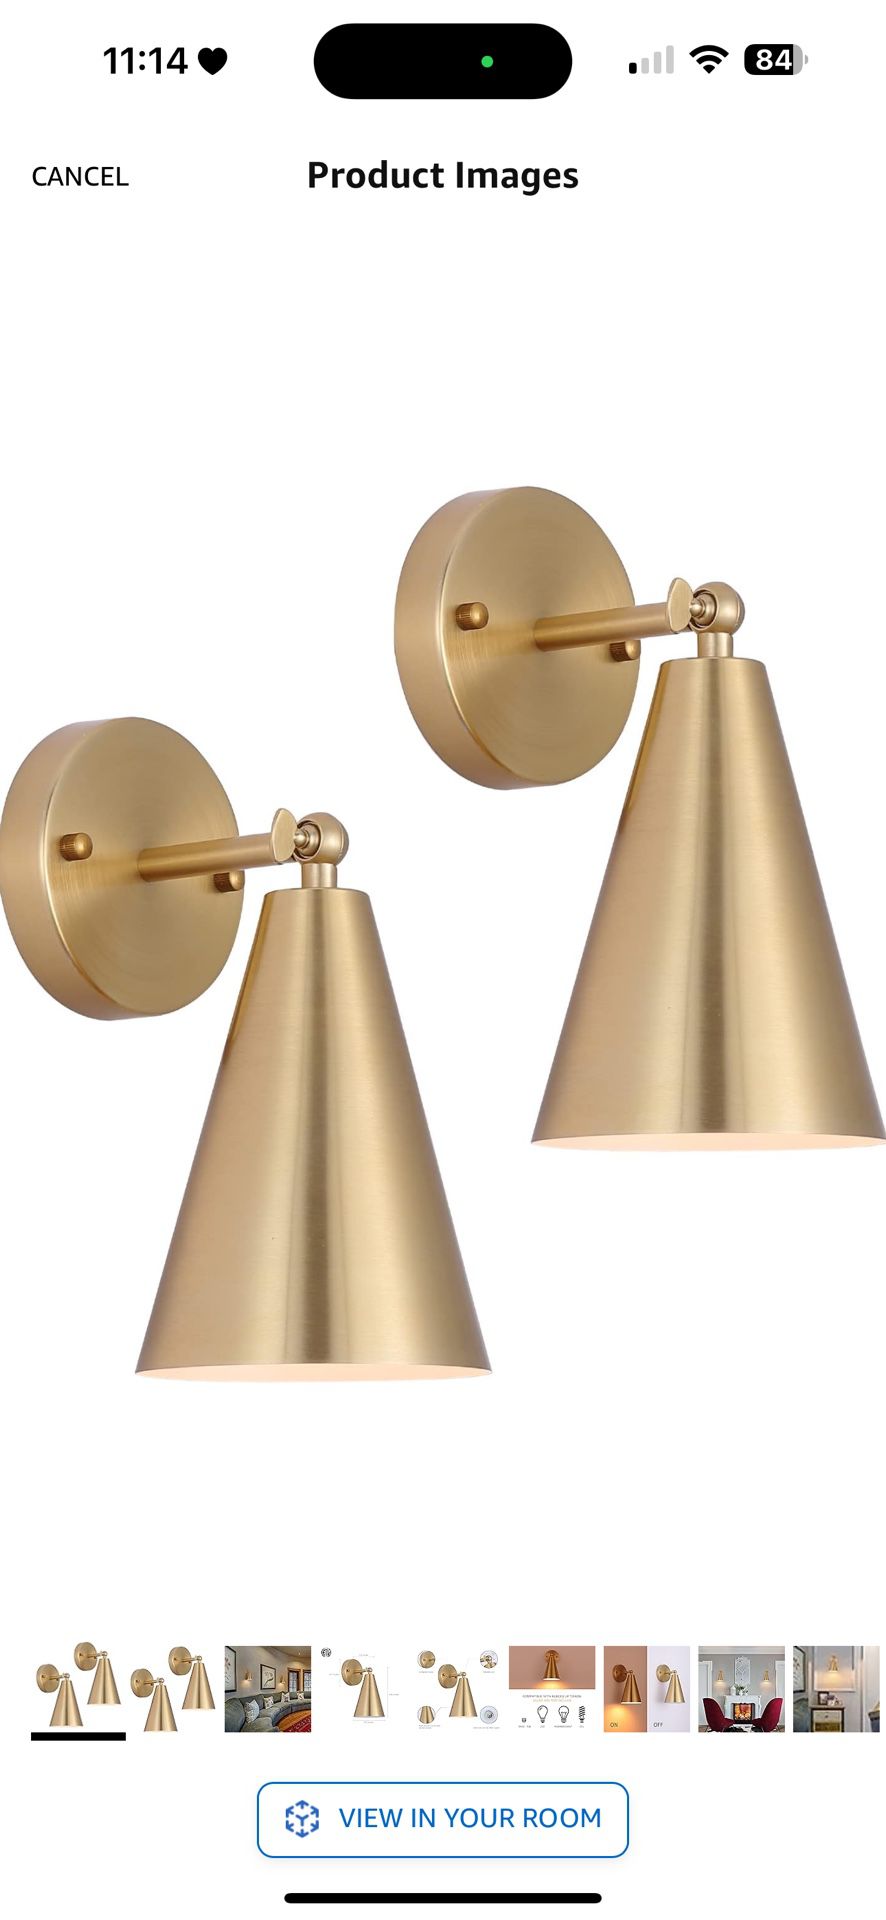 MWZ Gold Sconces Set of 2, Modern Brass Wall Sconces Lighting Fixtures with Metal Shade,